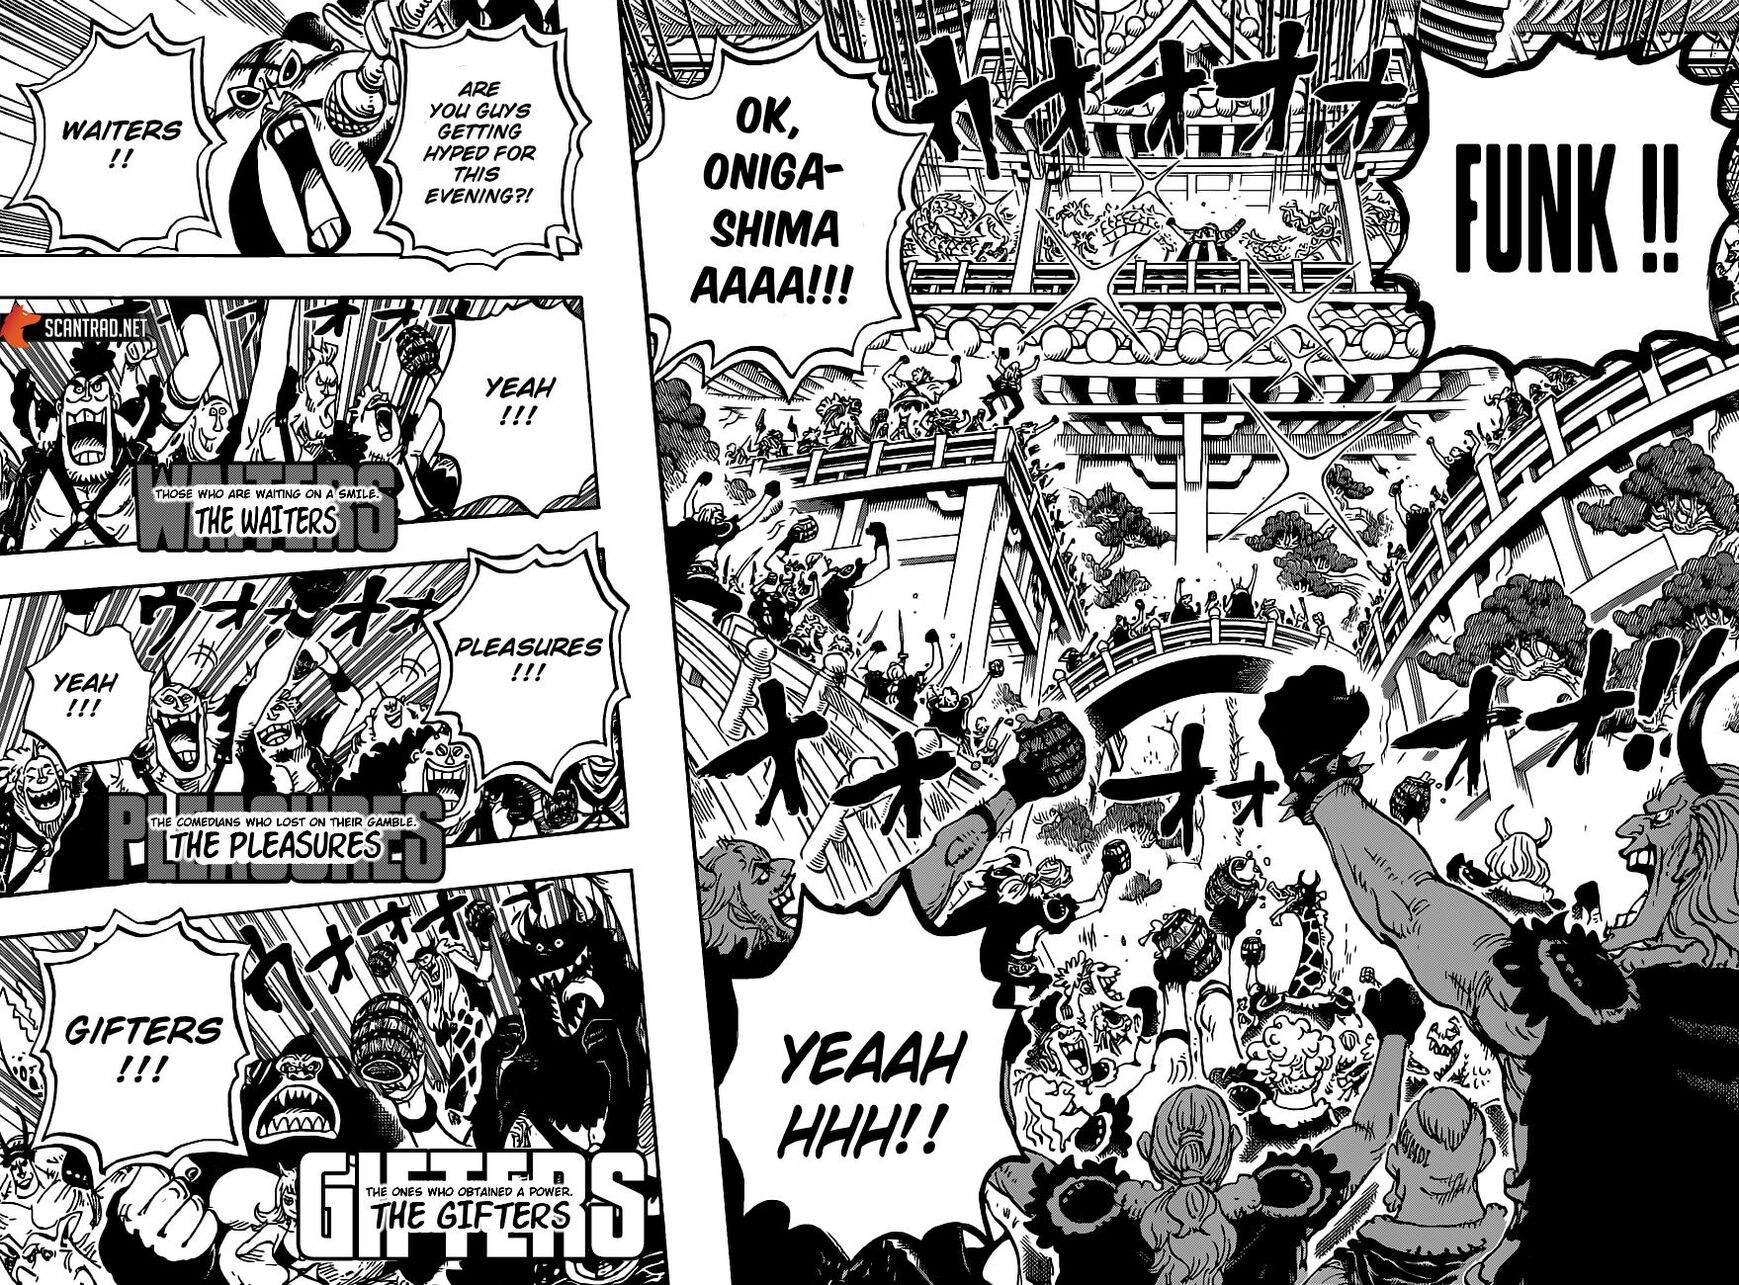 One Piece, Chapter 978 - Vol.69 Ch.978 image 09